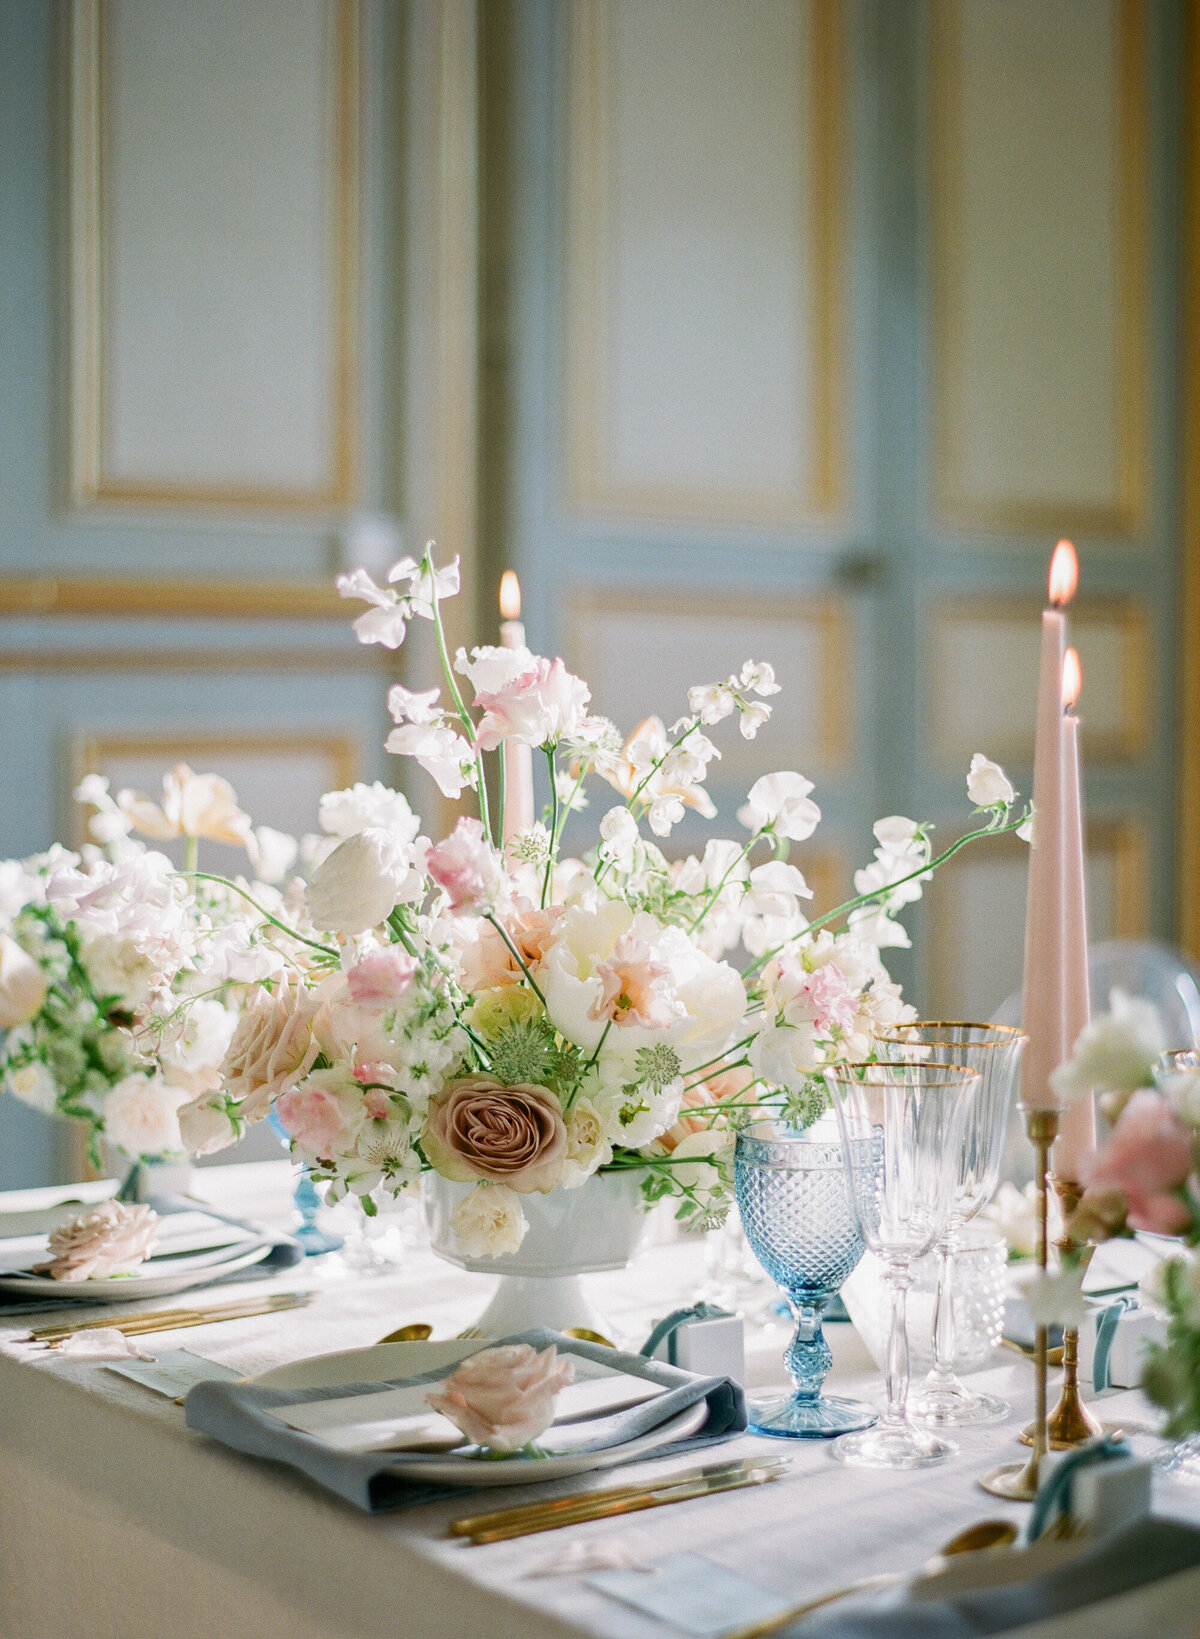 Jennifer Fox Weddings English speaking wedding planning & design agency in France crafting refined and bespoke weddings and celebrations Provence, Paris and destination Laurel-Chris-Chateau-de-Champlatreaux-Molly-Carr-Photography-85